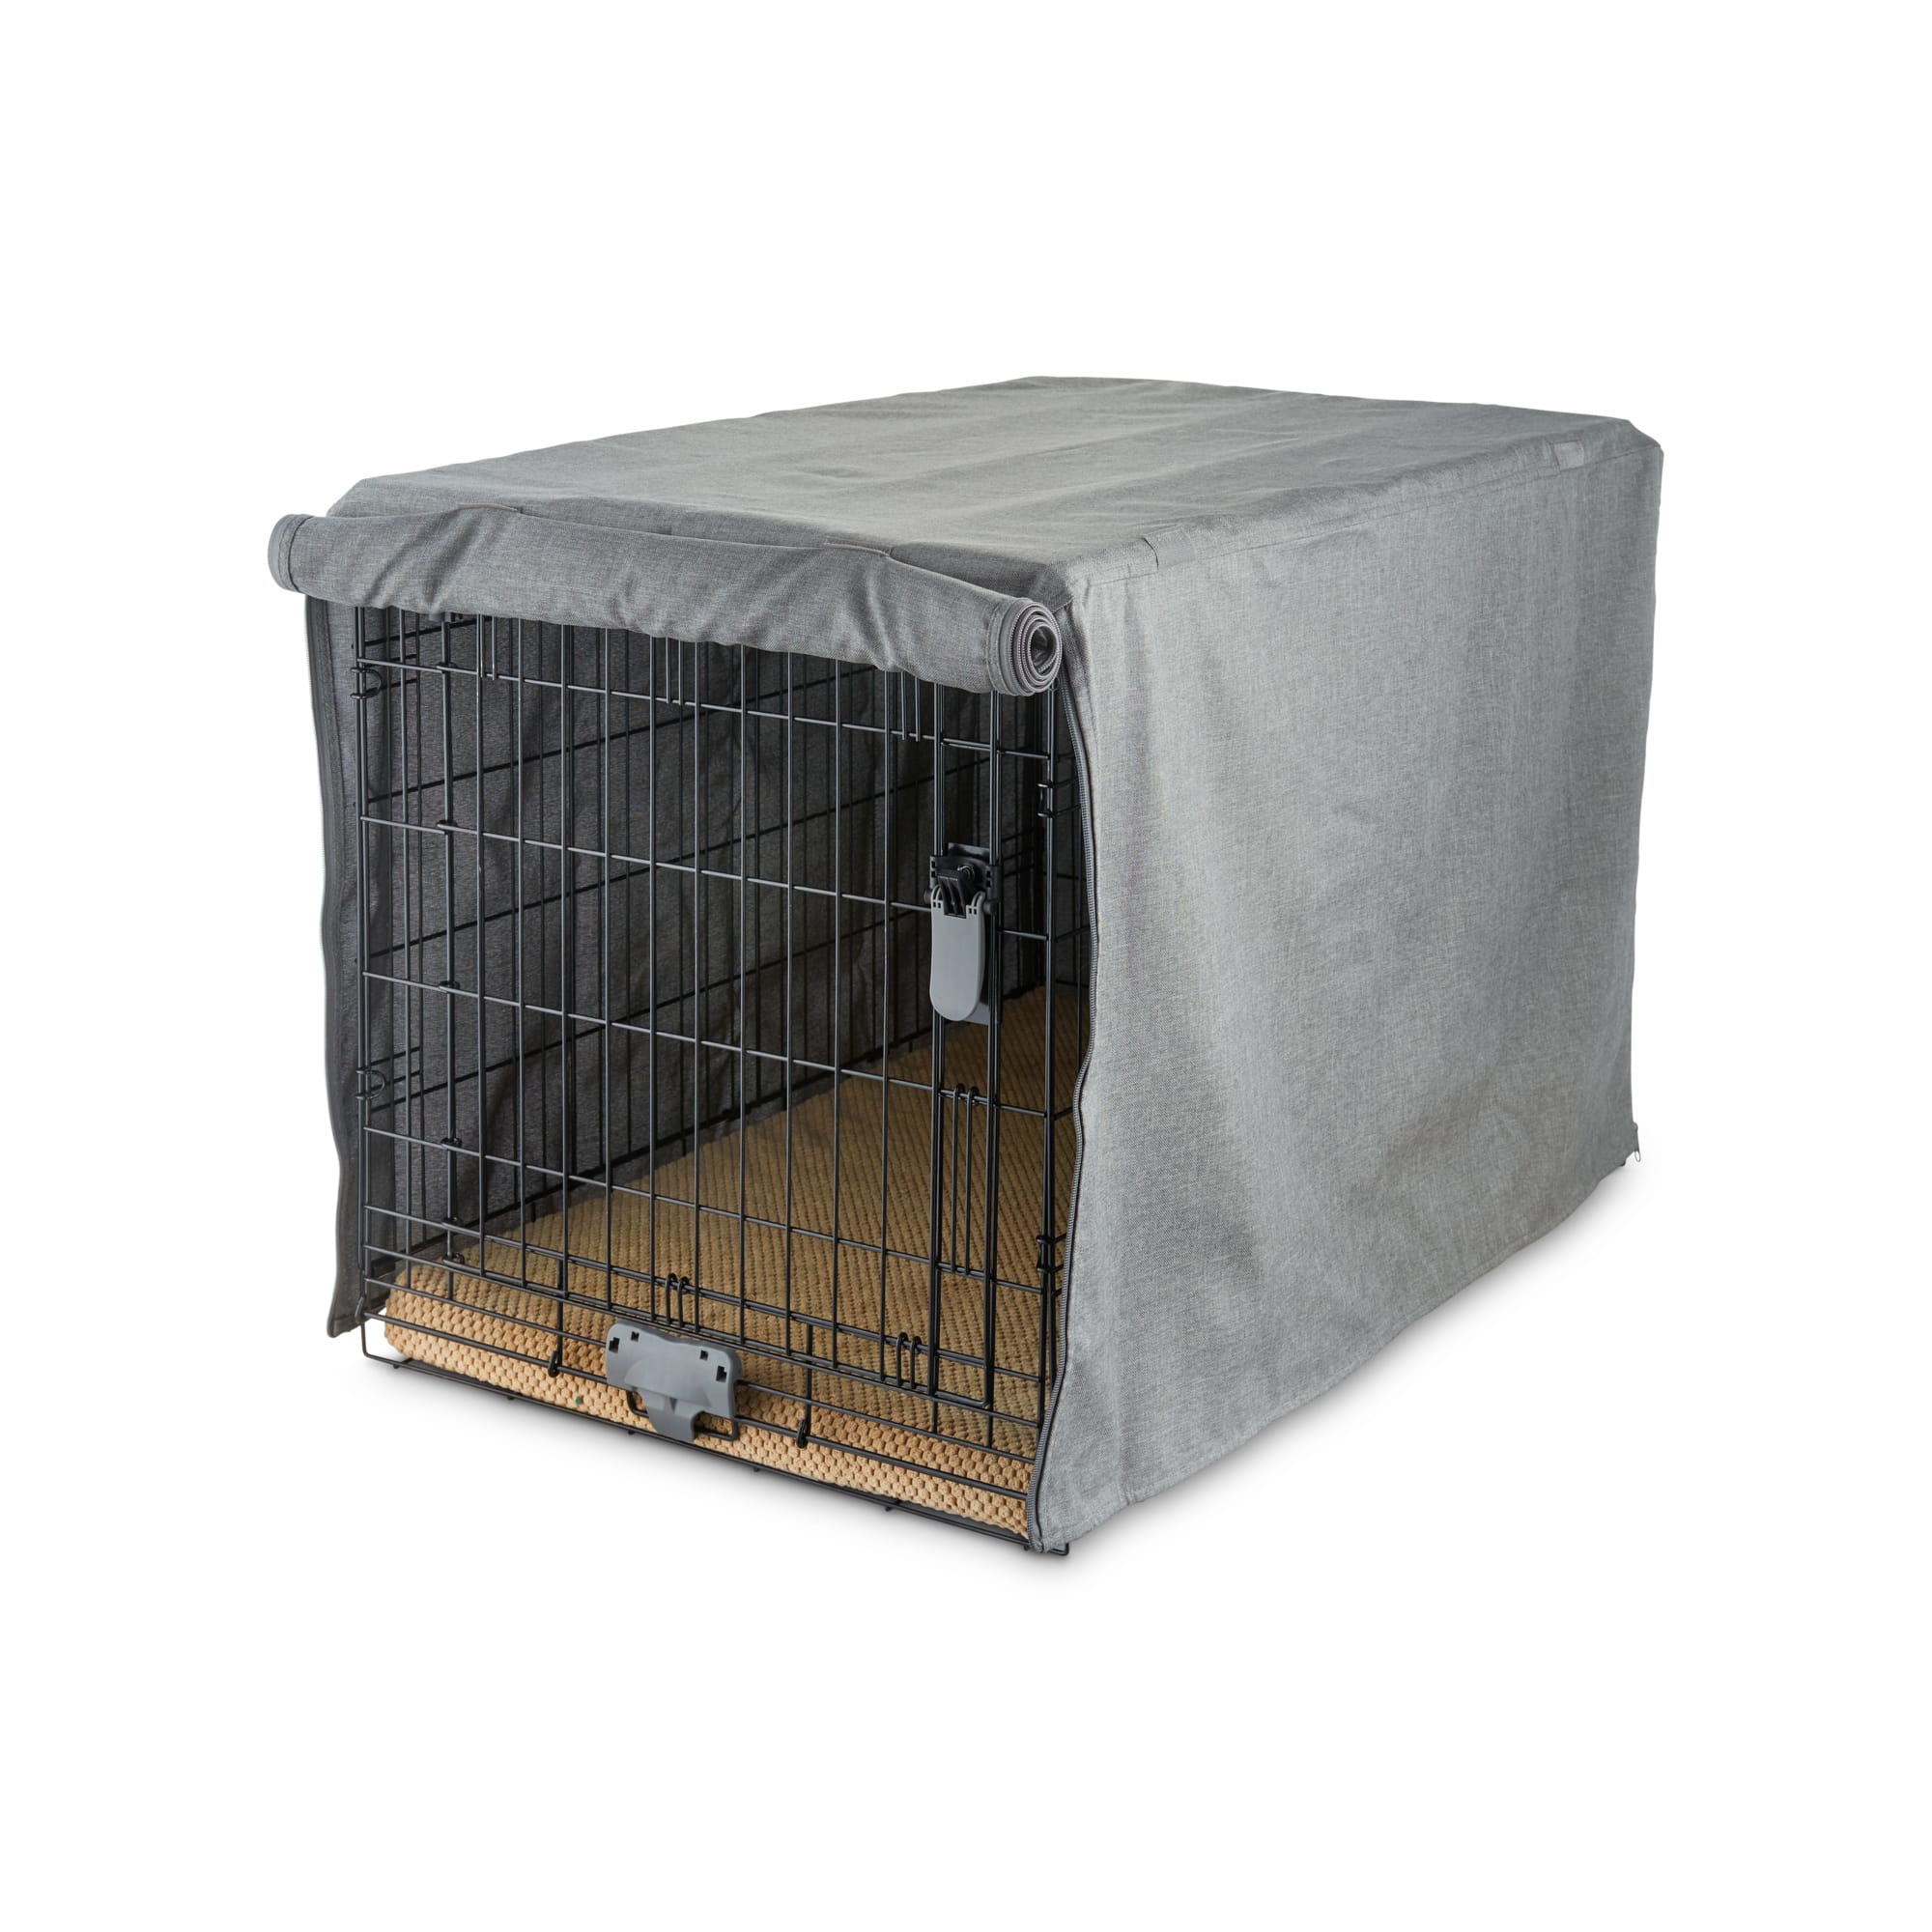 Bekasa Dog Cage Cover S 210D Oxford Cloth Windproof Crate Cover for Dog Crates Pet Kennel Cover for Wire Crate Indoor Outdoor Protection